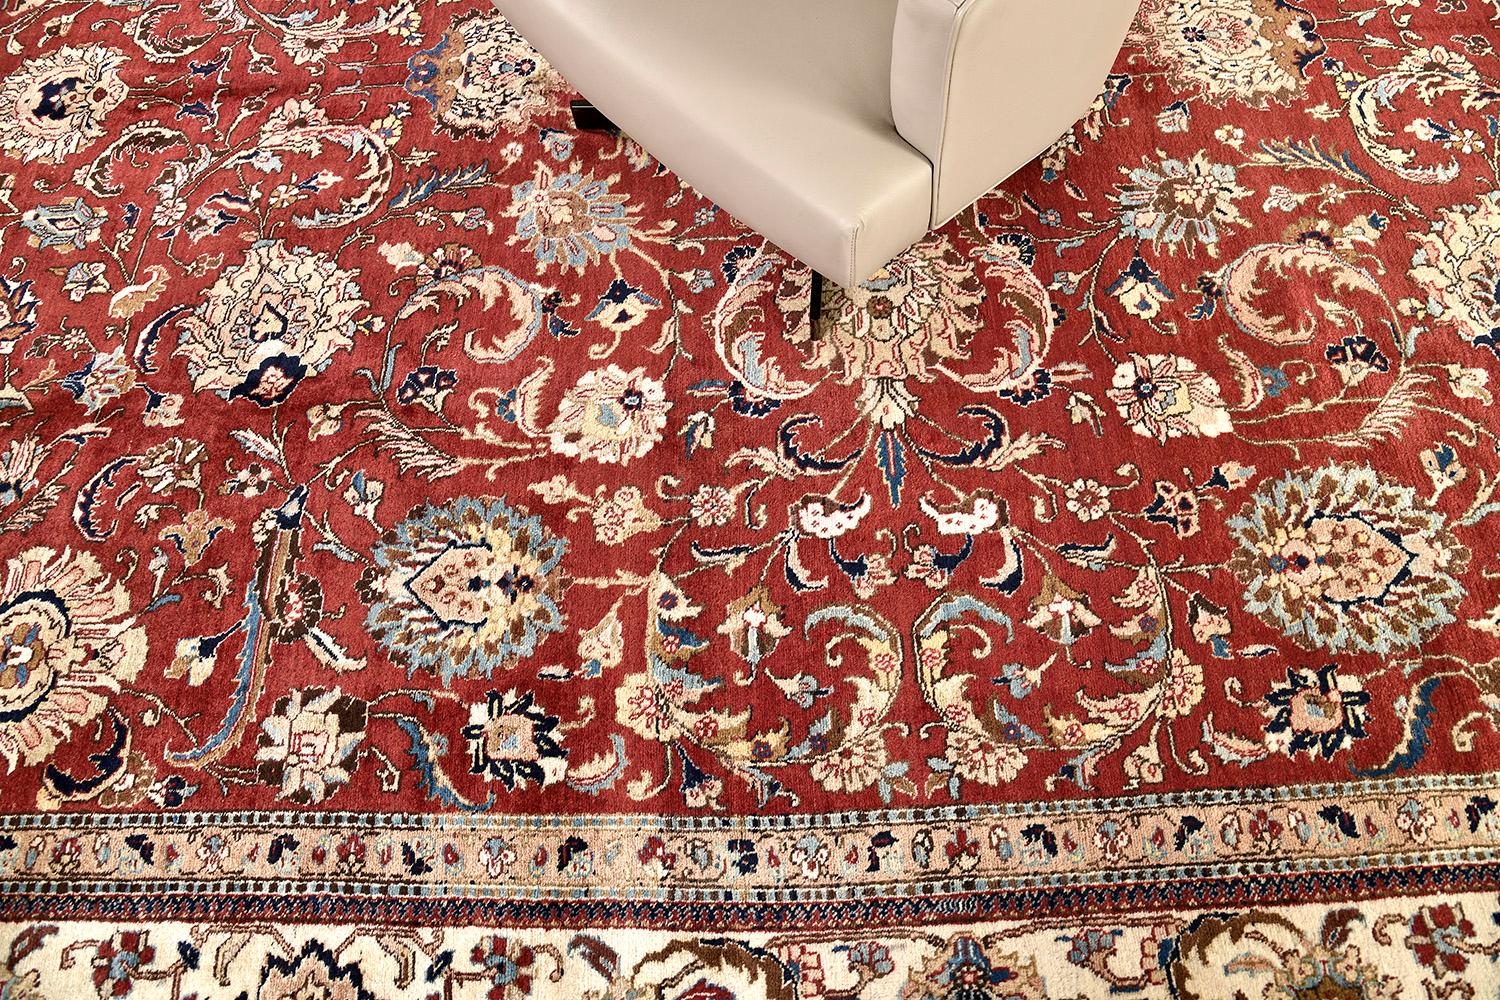 This luxurious Tabriz revival is nothing shy of elegance and artistry. A traditional creation encompasses the beauty and sophistication of traditional Persian designs in cream and bright red. This rug is suitable for both traditional and modern